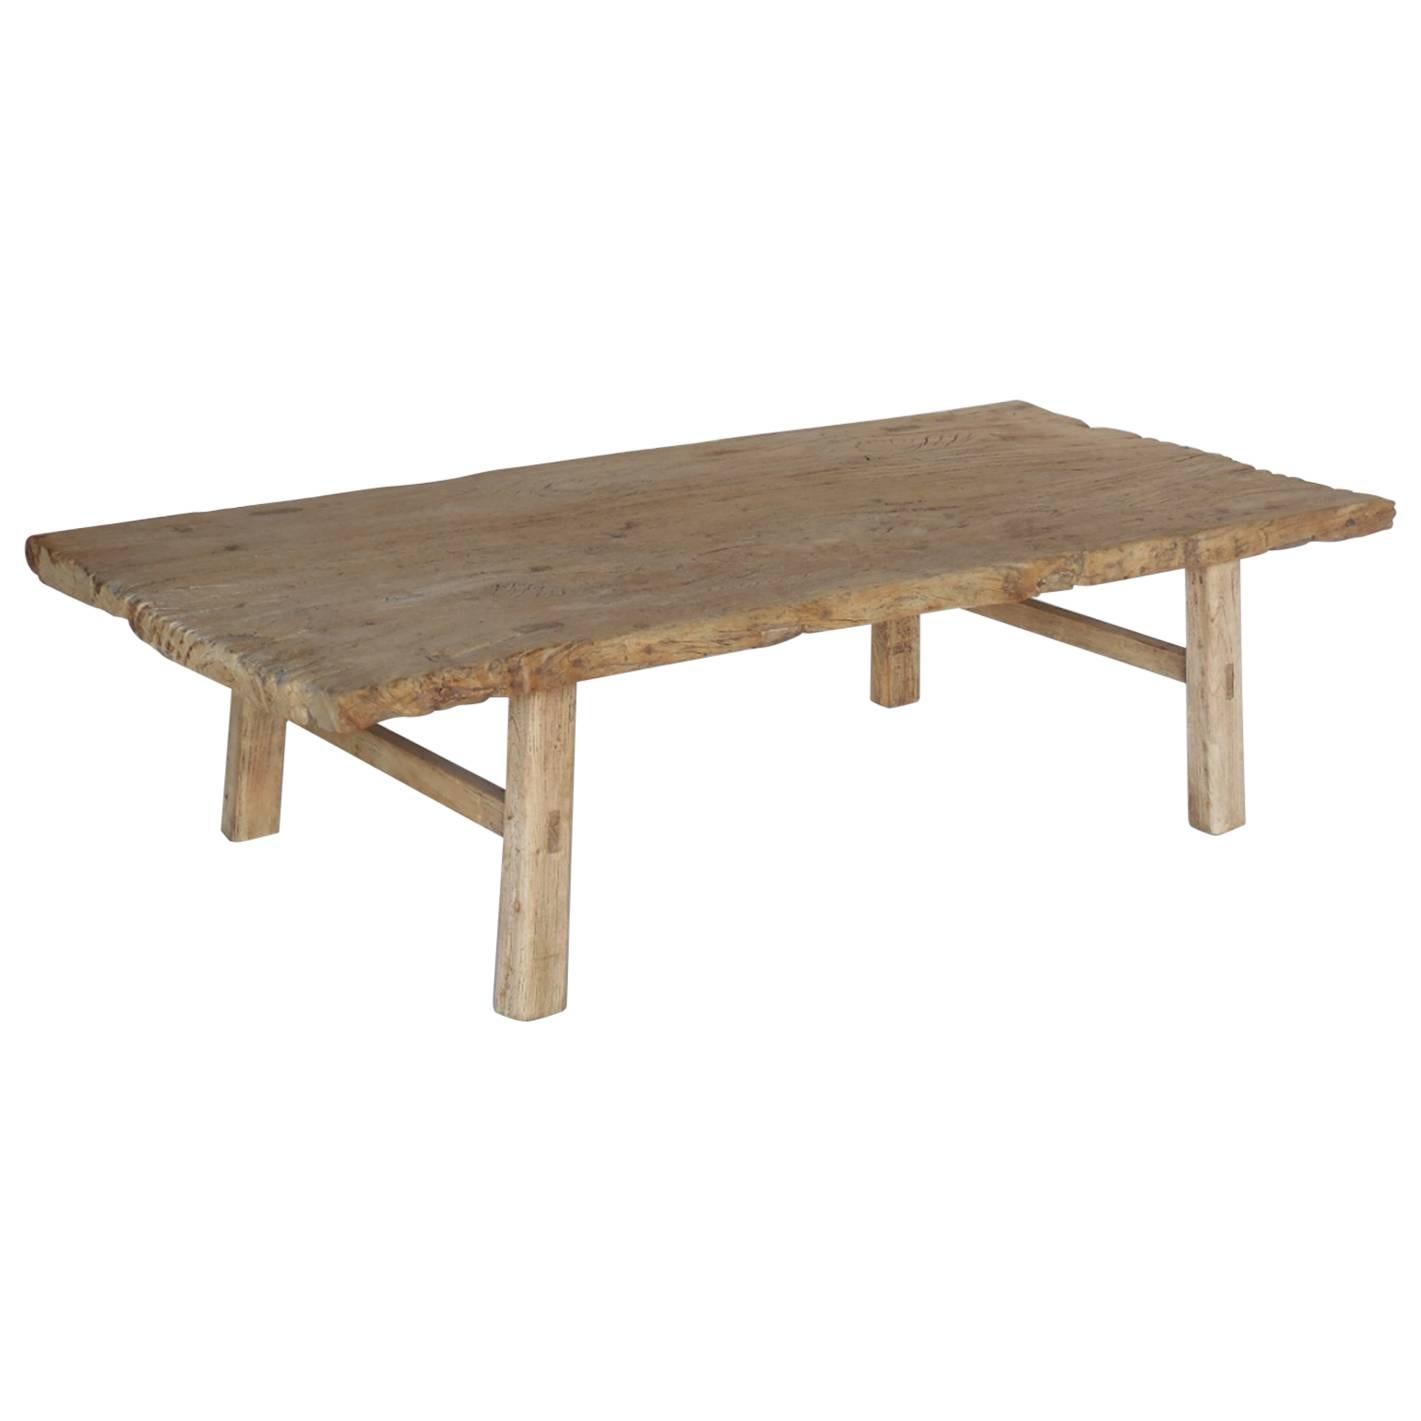 Japanese Elm Wood Coffee Table with Natural Driftwood Patina